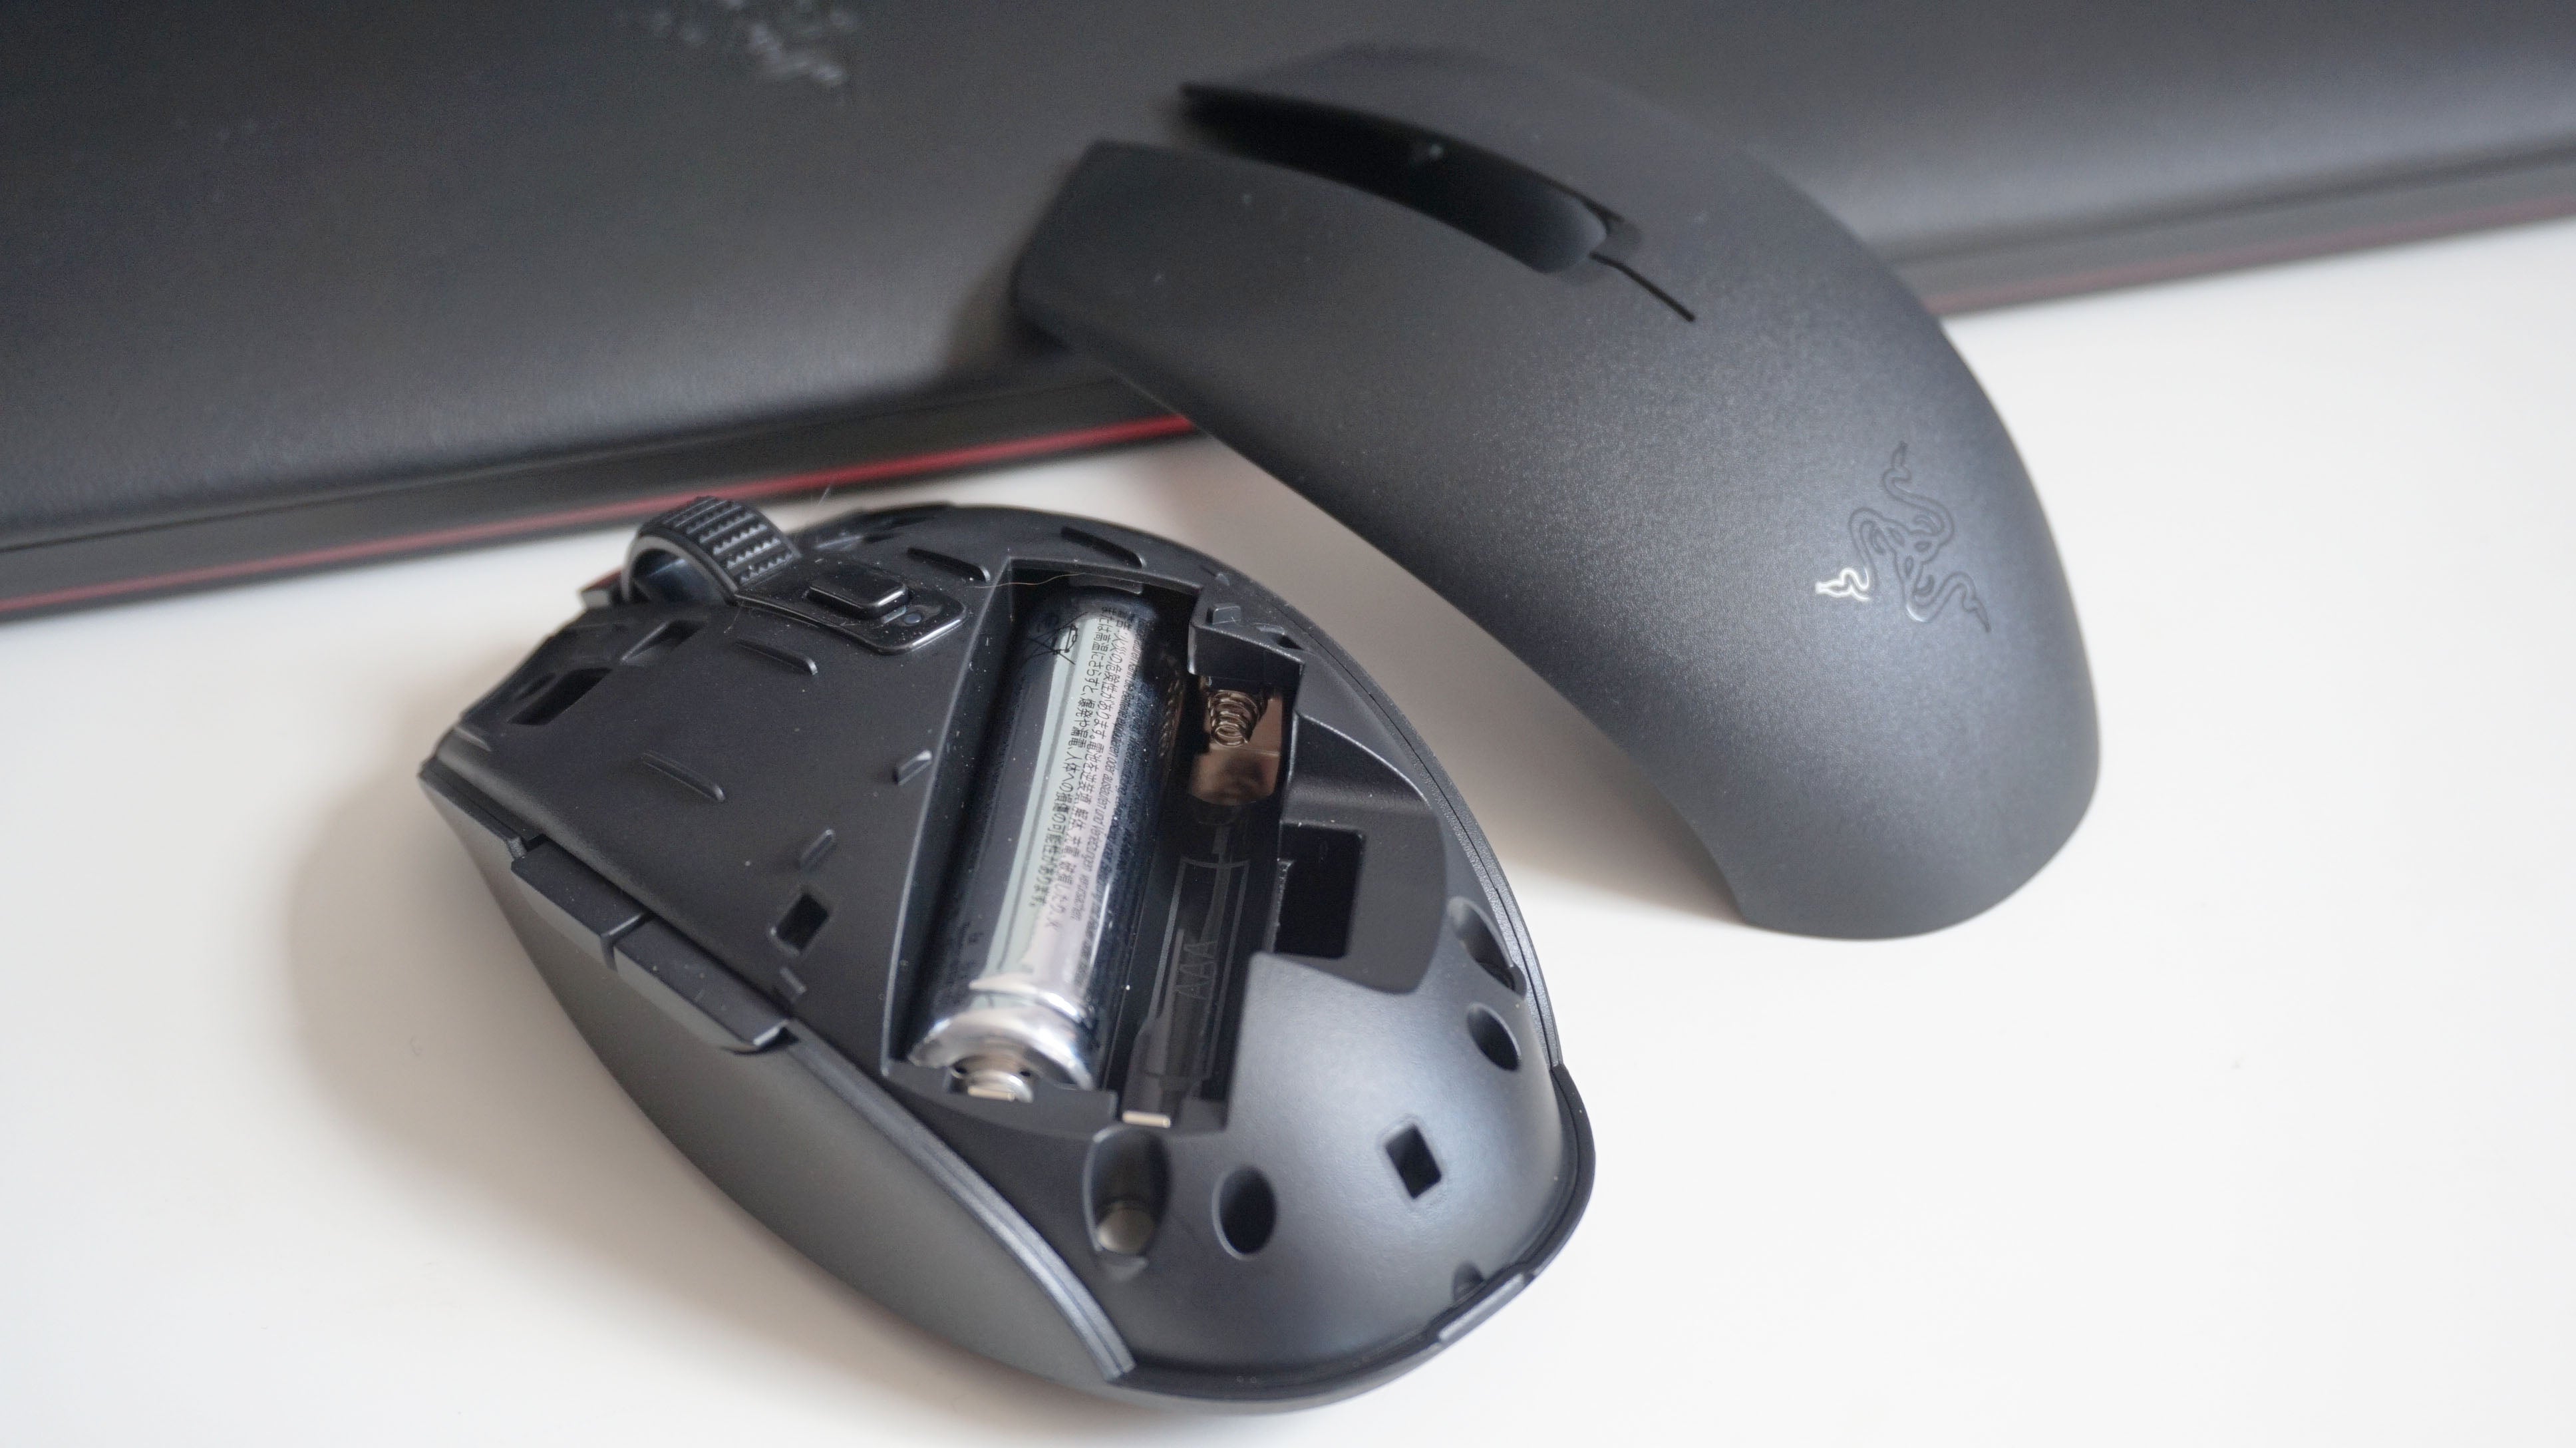 The Razer Orochi V2 wireless gaming mouse's inner battery compartments